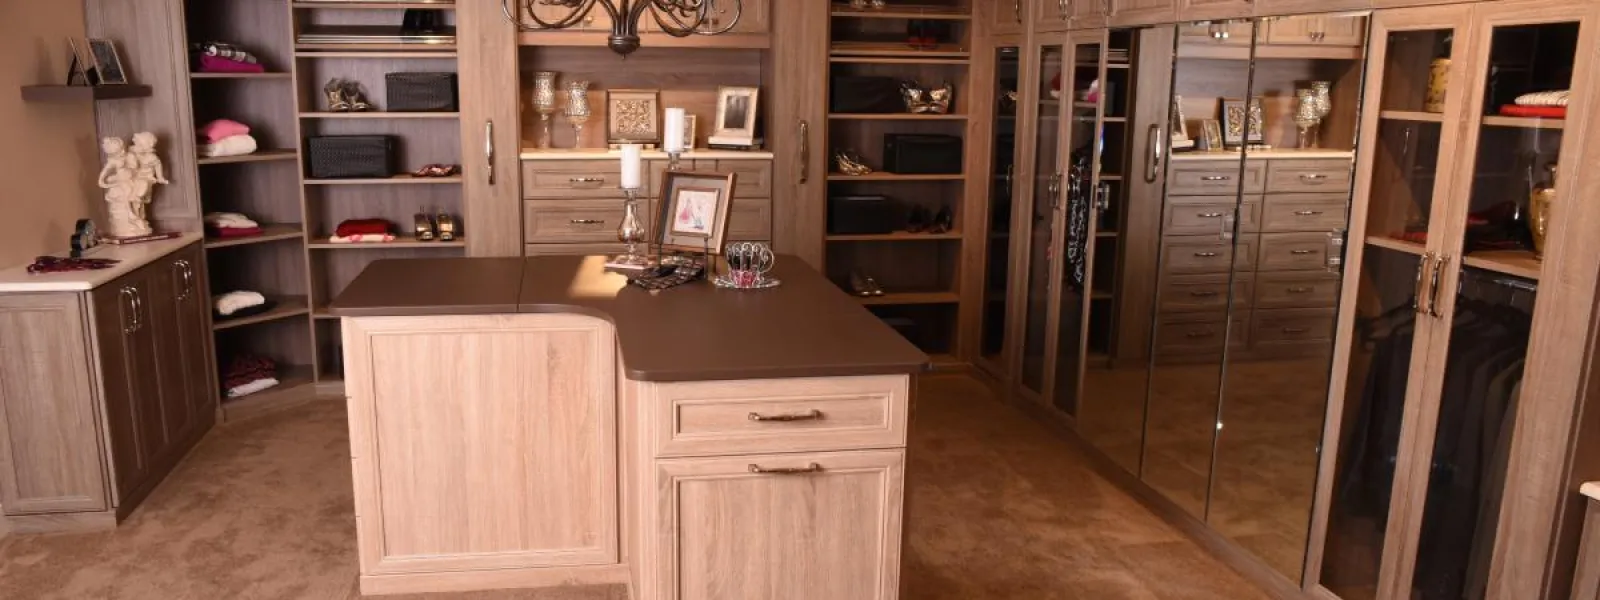 Create a Craft Room for Holiday Storage in the Florida Panhandle